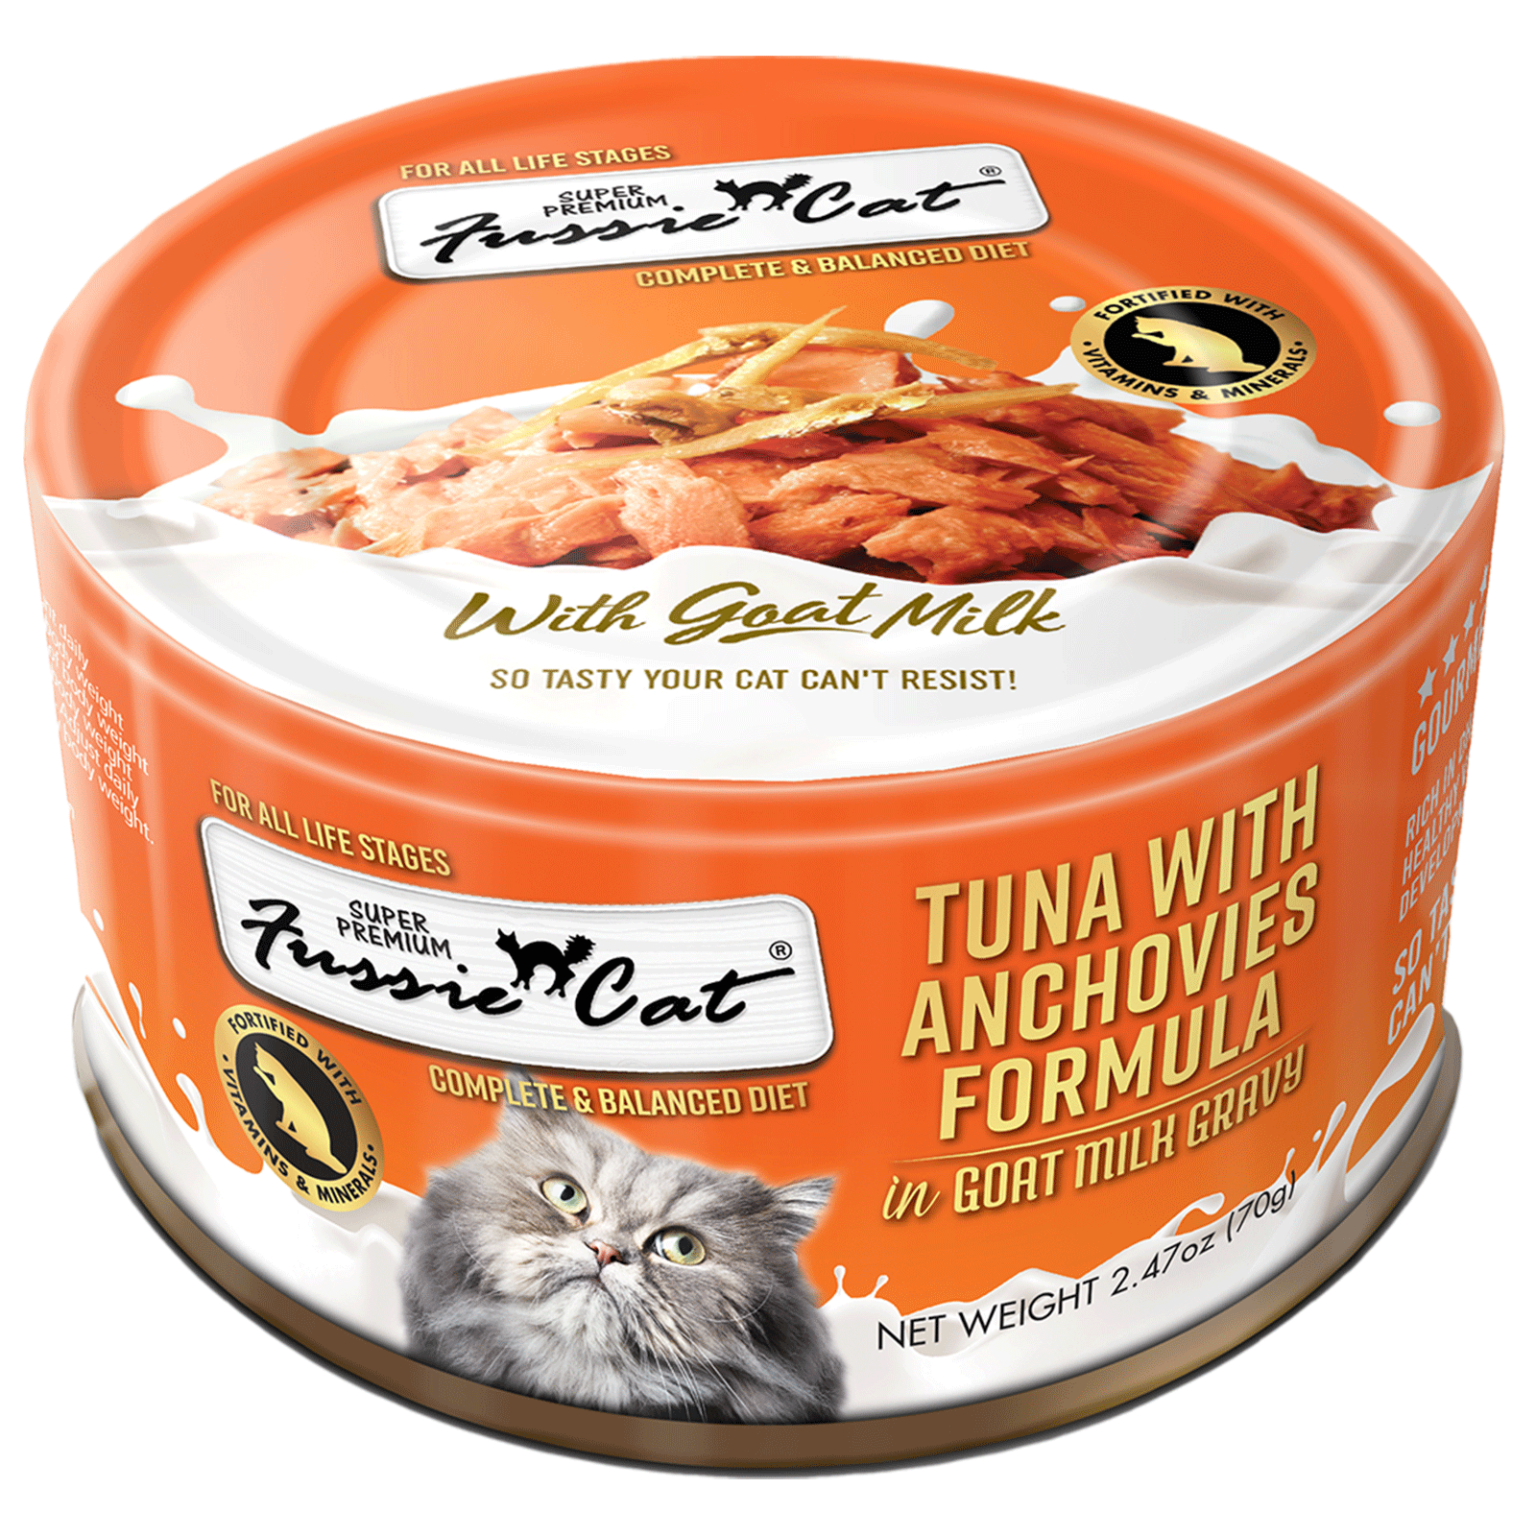 Fussie Cat Canned Tuna With Anchovies & Goat Milk Gravy 2.47oz